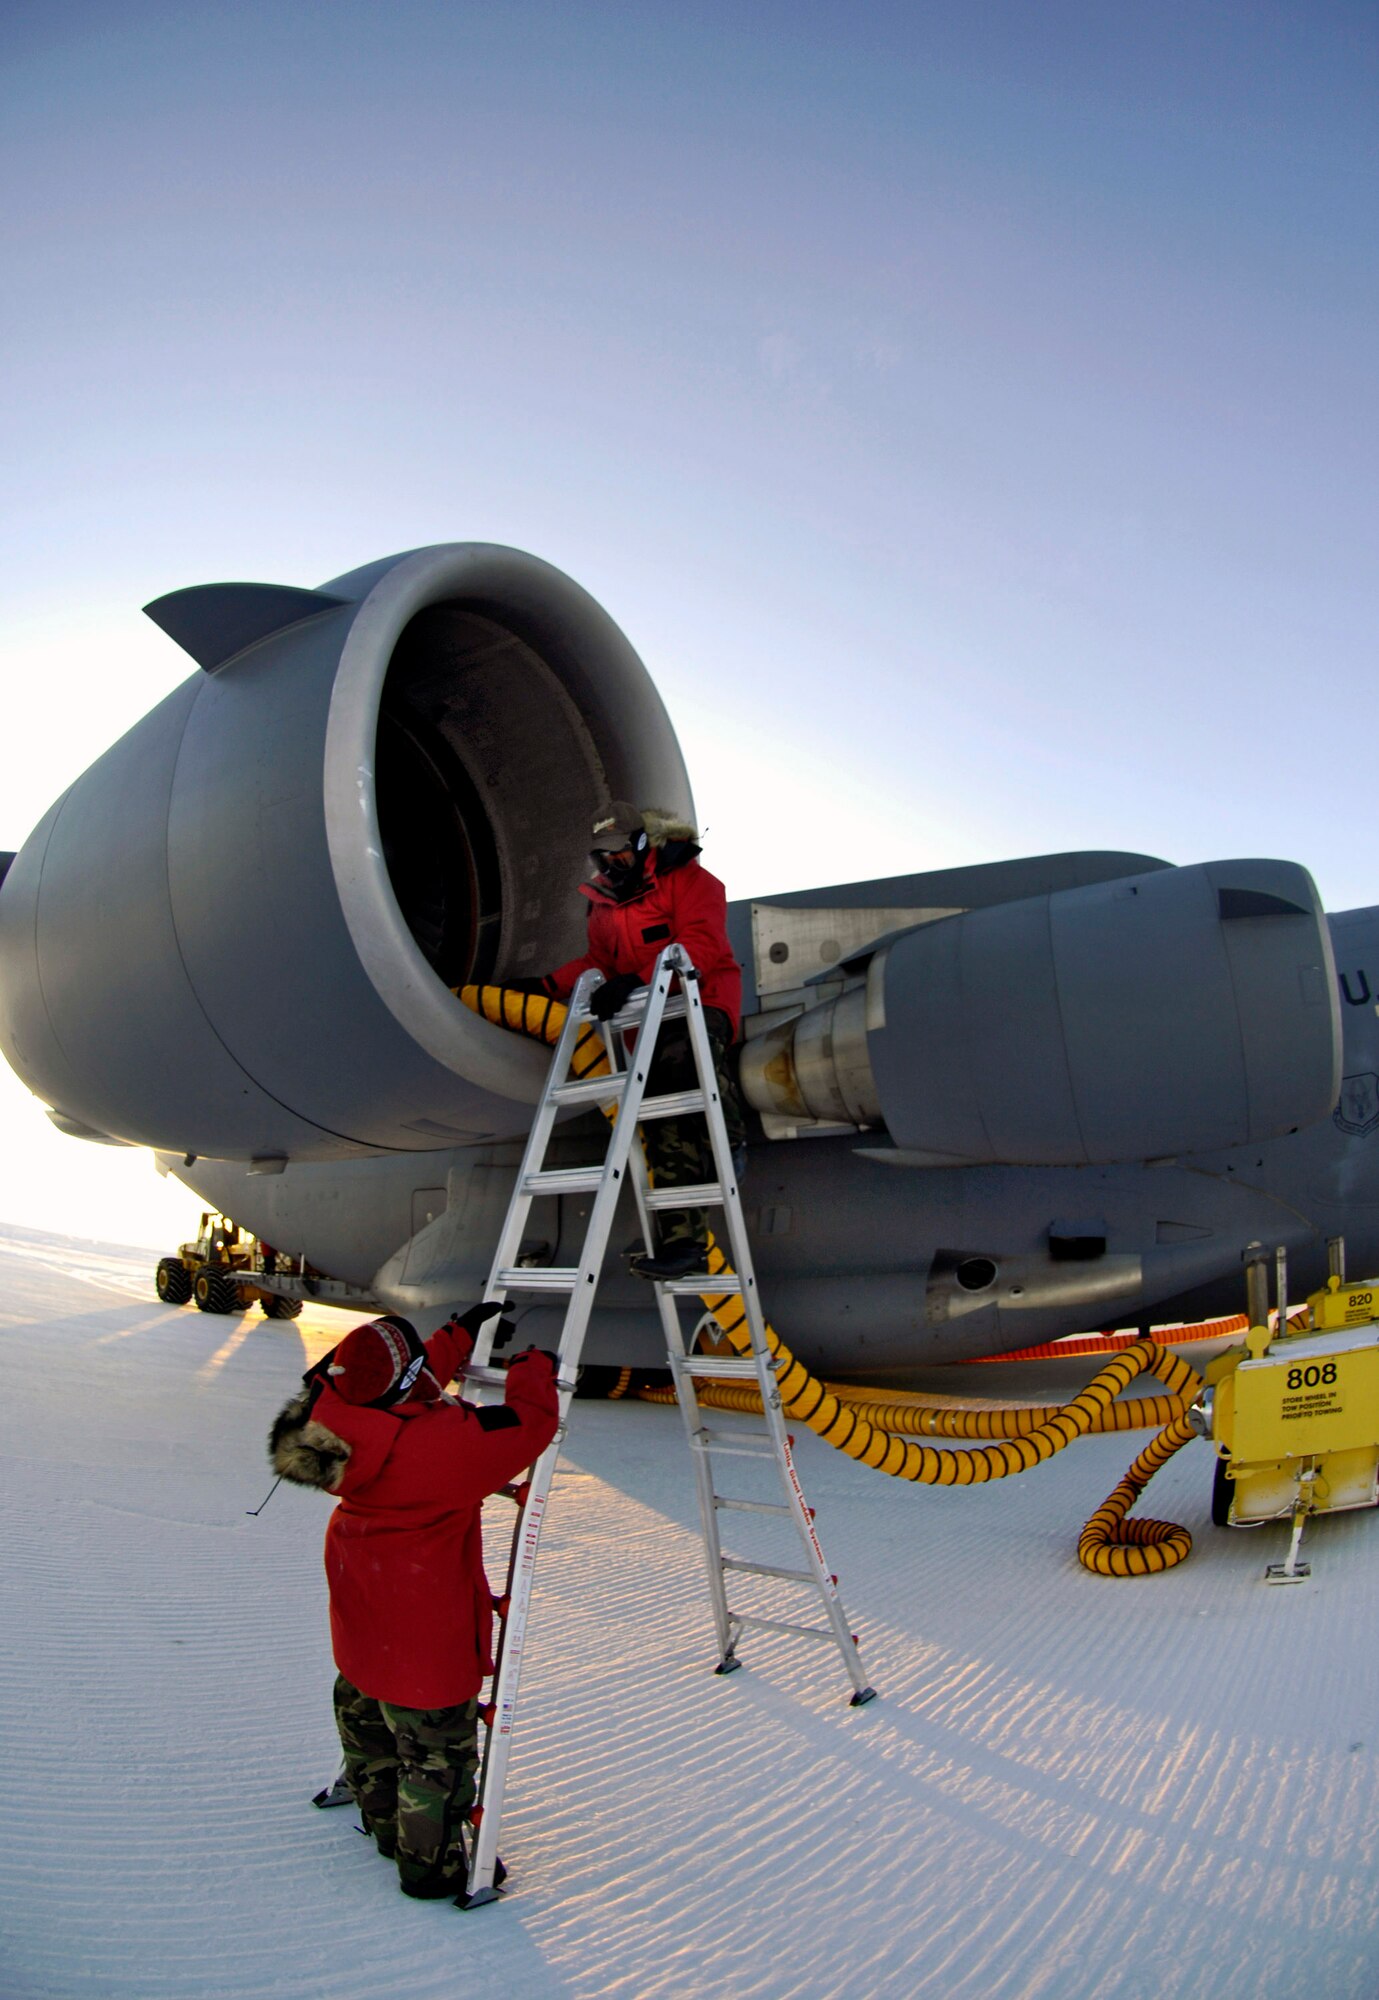 Staff Sgt. Jennifer Torres and Senior Airman Thomas Grover attach heater hoses to the engines of a C-17 Globemaster III for an Operation Deep Freeze winter fly-in mission Aug. 25 at Pegasus White Ice Runway, Antarctica. Because of the extreme temperatures, heaters are used on the aircraft to prevent maintenance problems and keep it functioning properly upon engine start-up. (U.S. Air Force photo/Tech. Sgt. Shane A. Cuomo) 